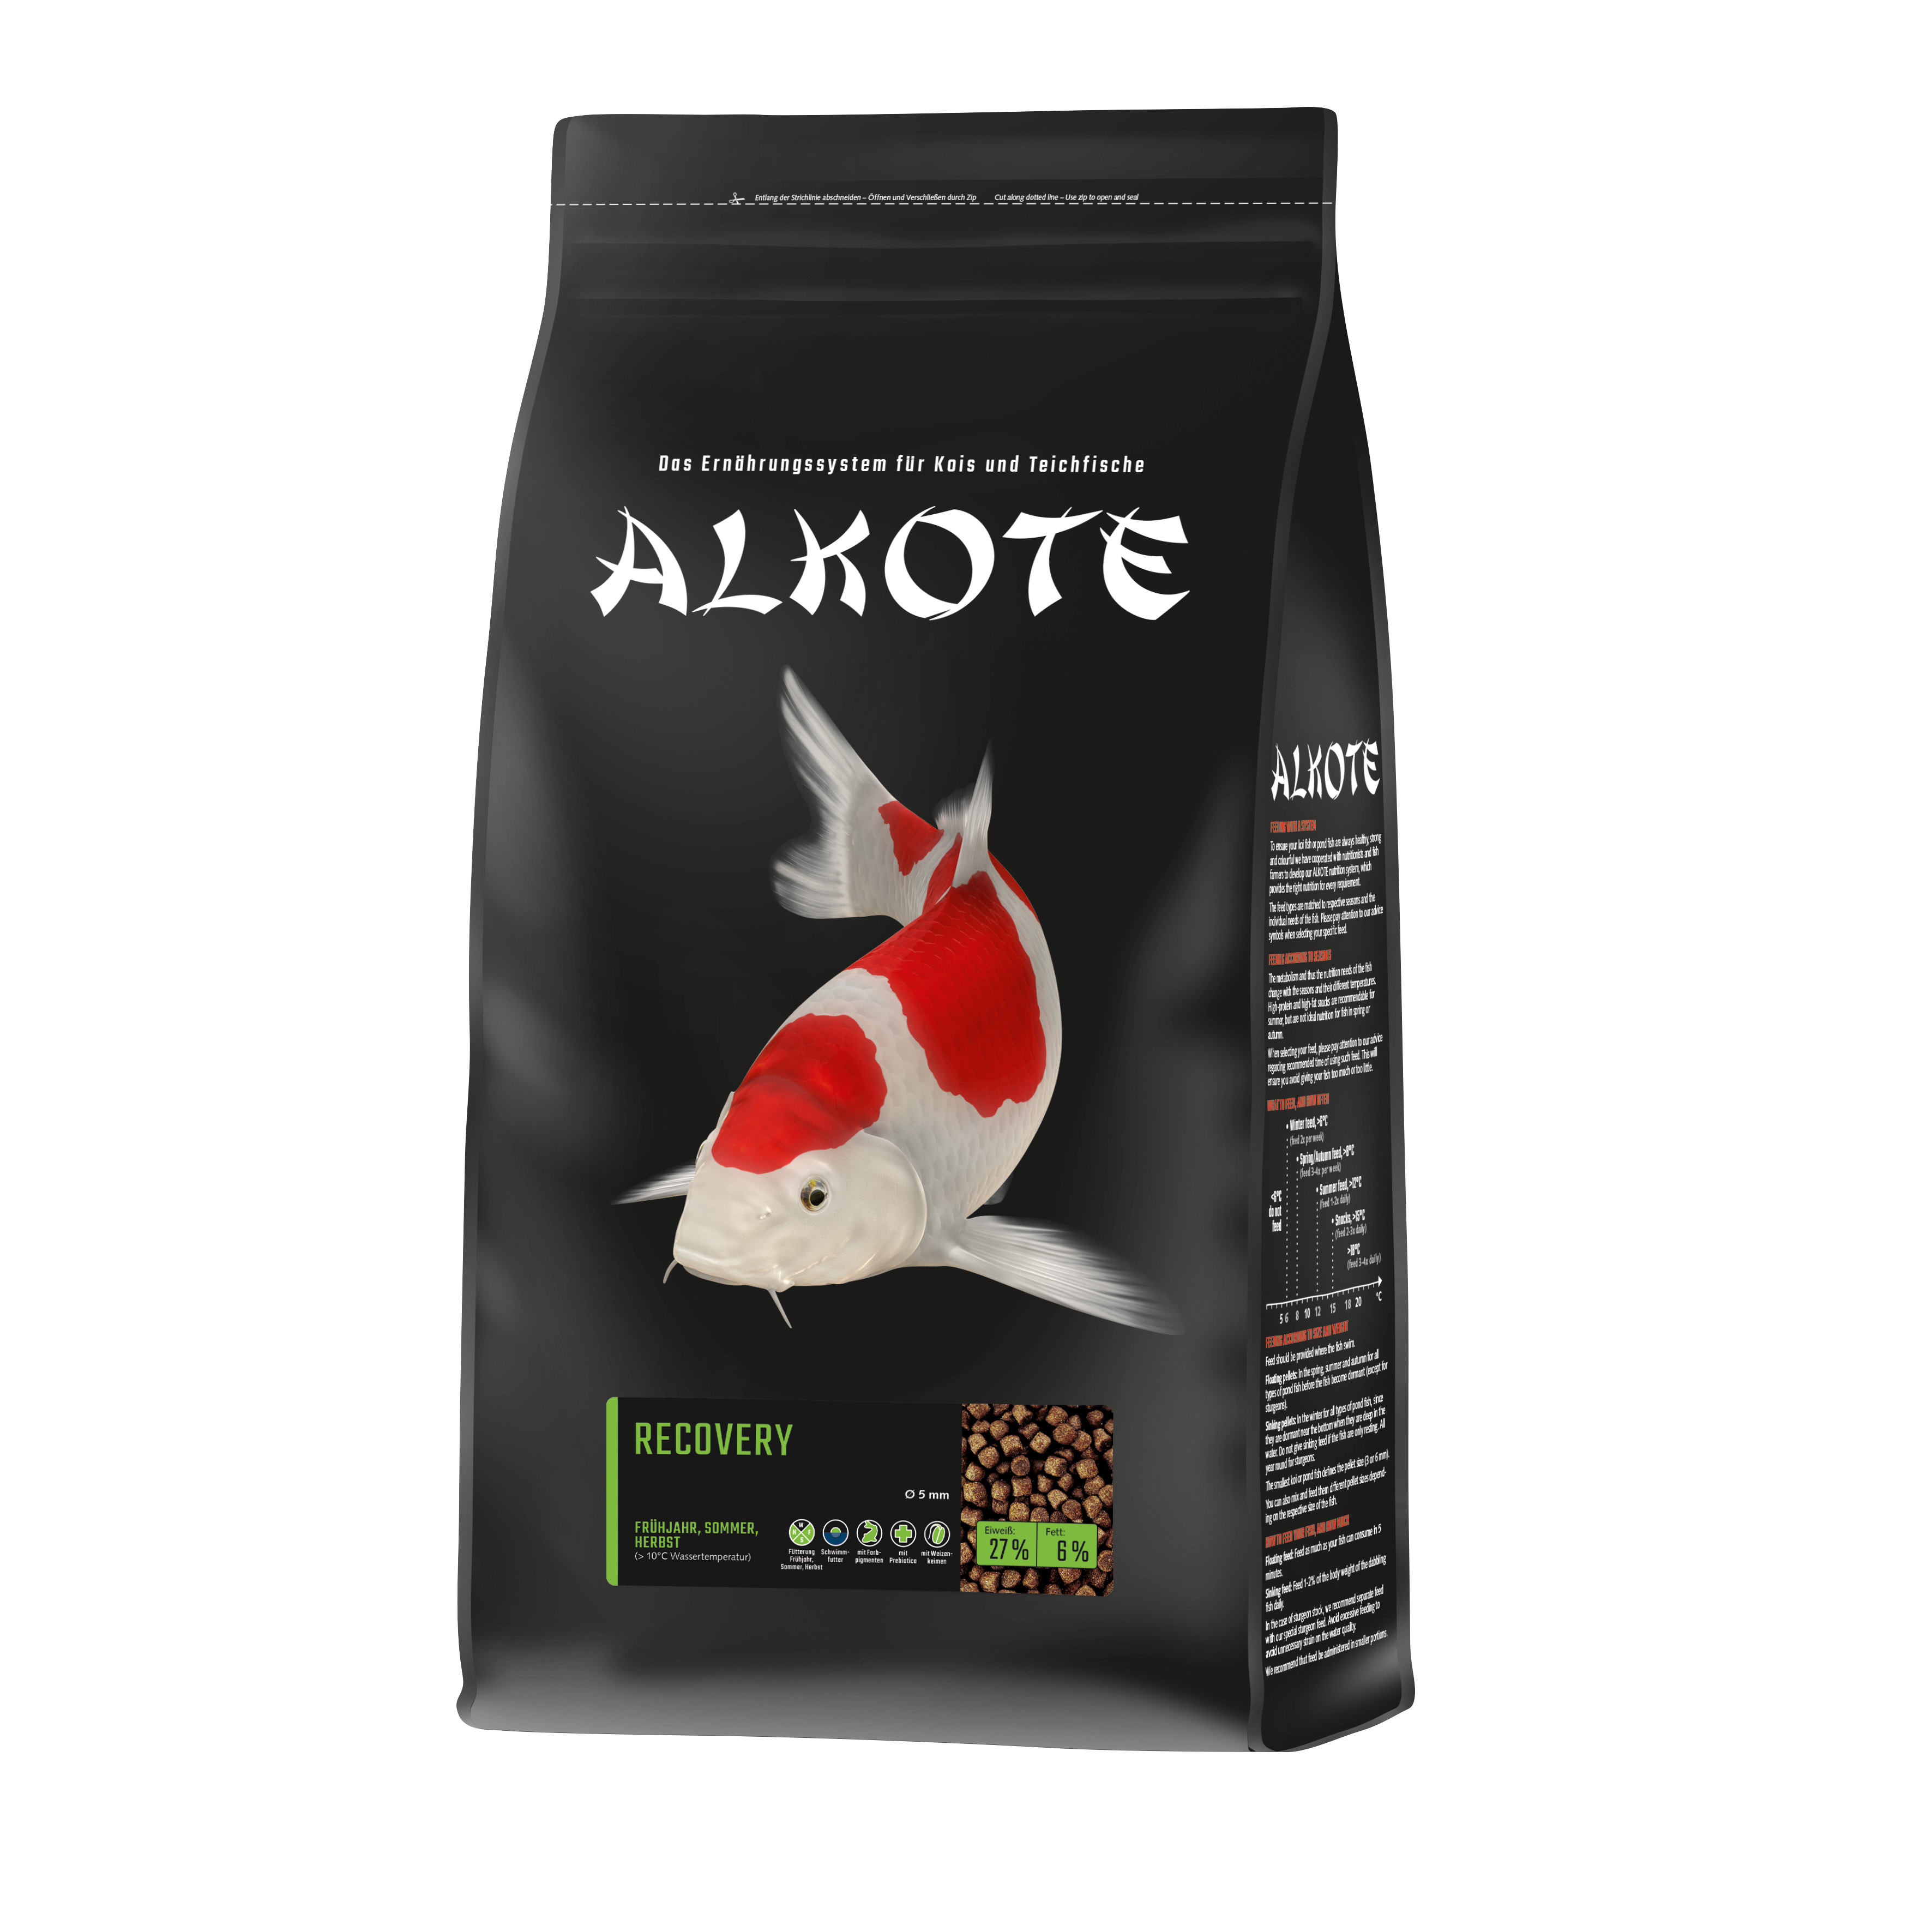 ALKOTE – Recovery